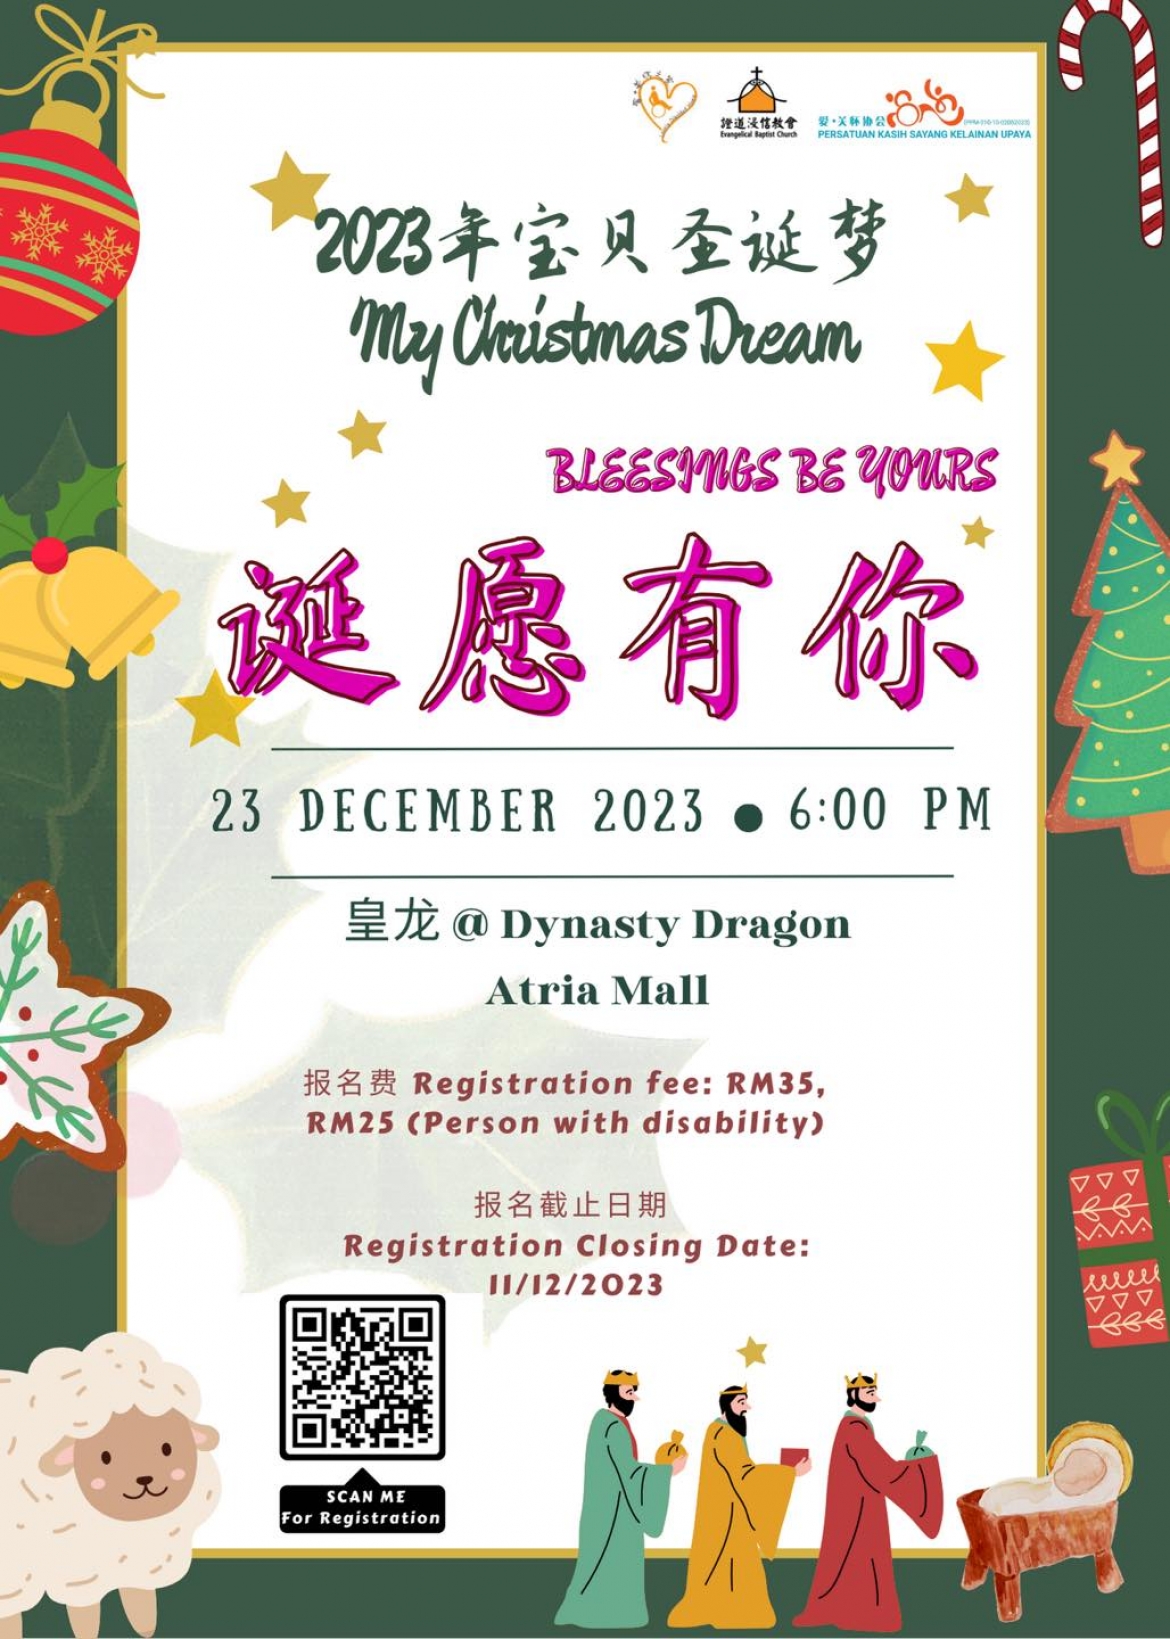 12th *&quot;My Christmas Dream: Blessings Be You&quot;